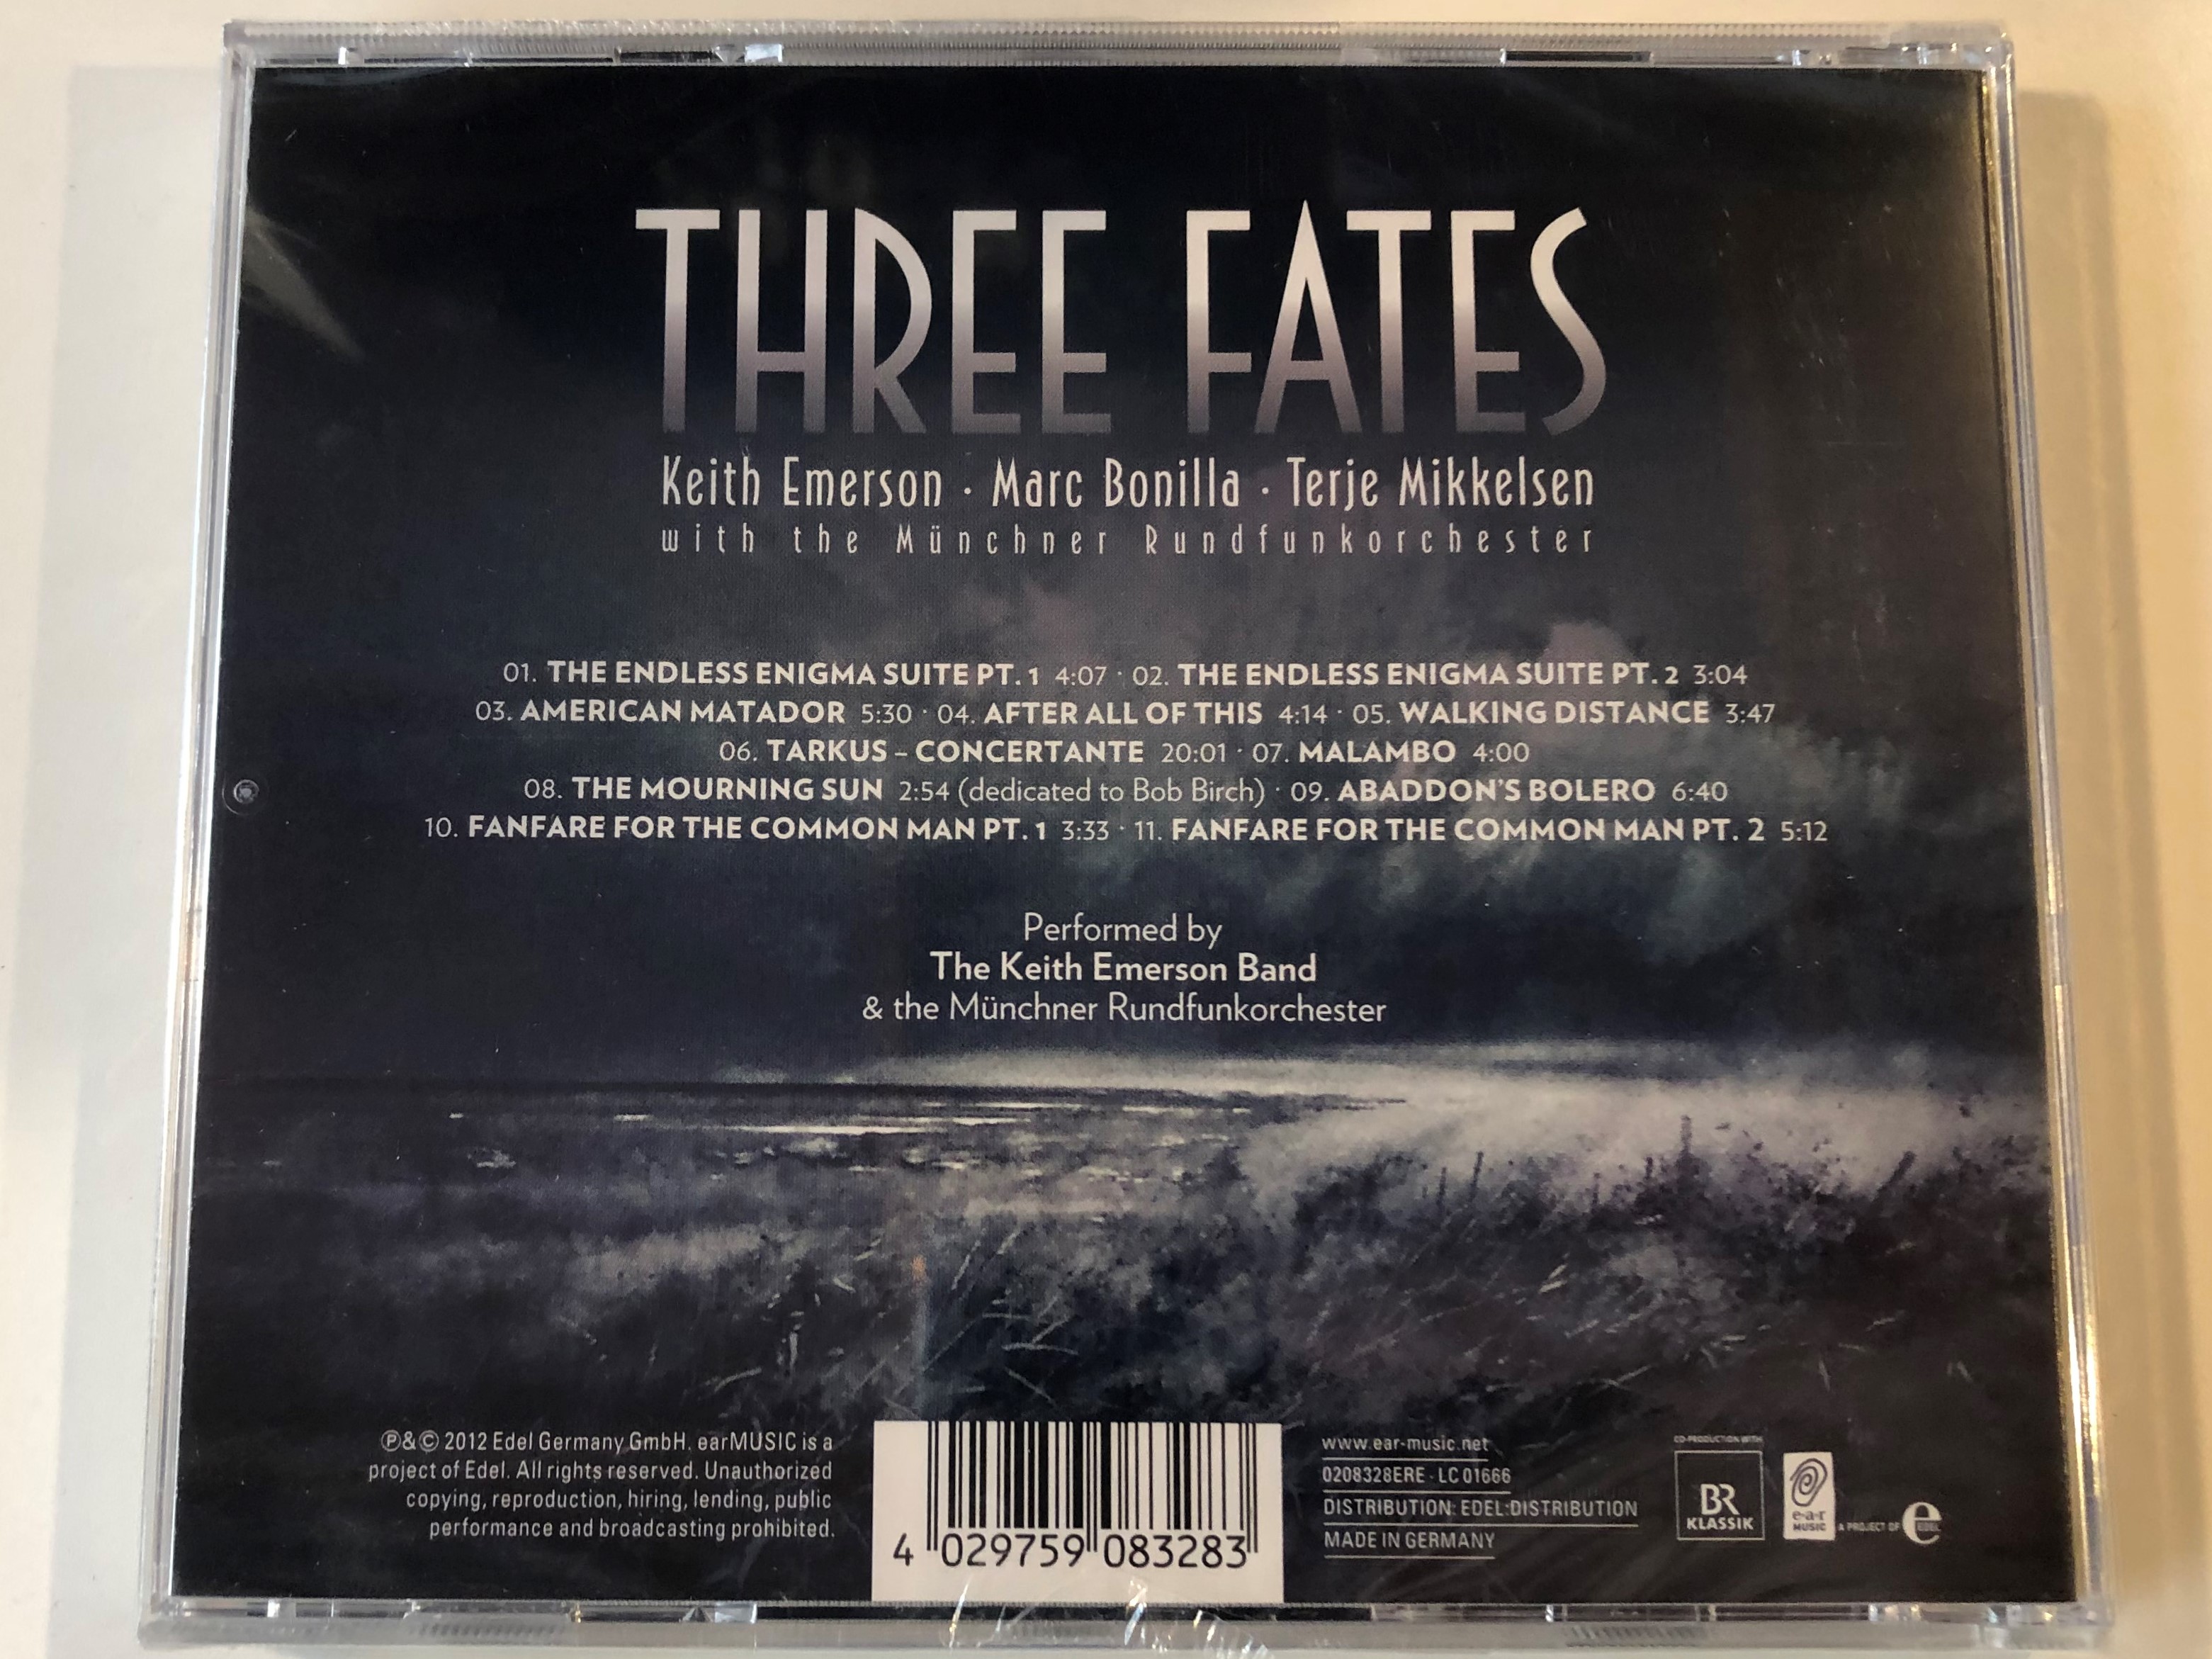 three-fates-keith-emerson-marc-bonilla-terje-mikkelsen-with-the-m-nchner-rundfunkorchester-performed-by-the-keith-emerson-band-the-m-nchner-rundfunkorchester-ear-music-audio-cd-2012-.jpg